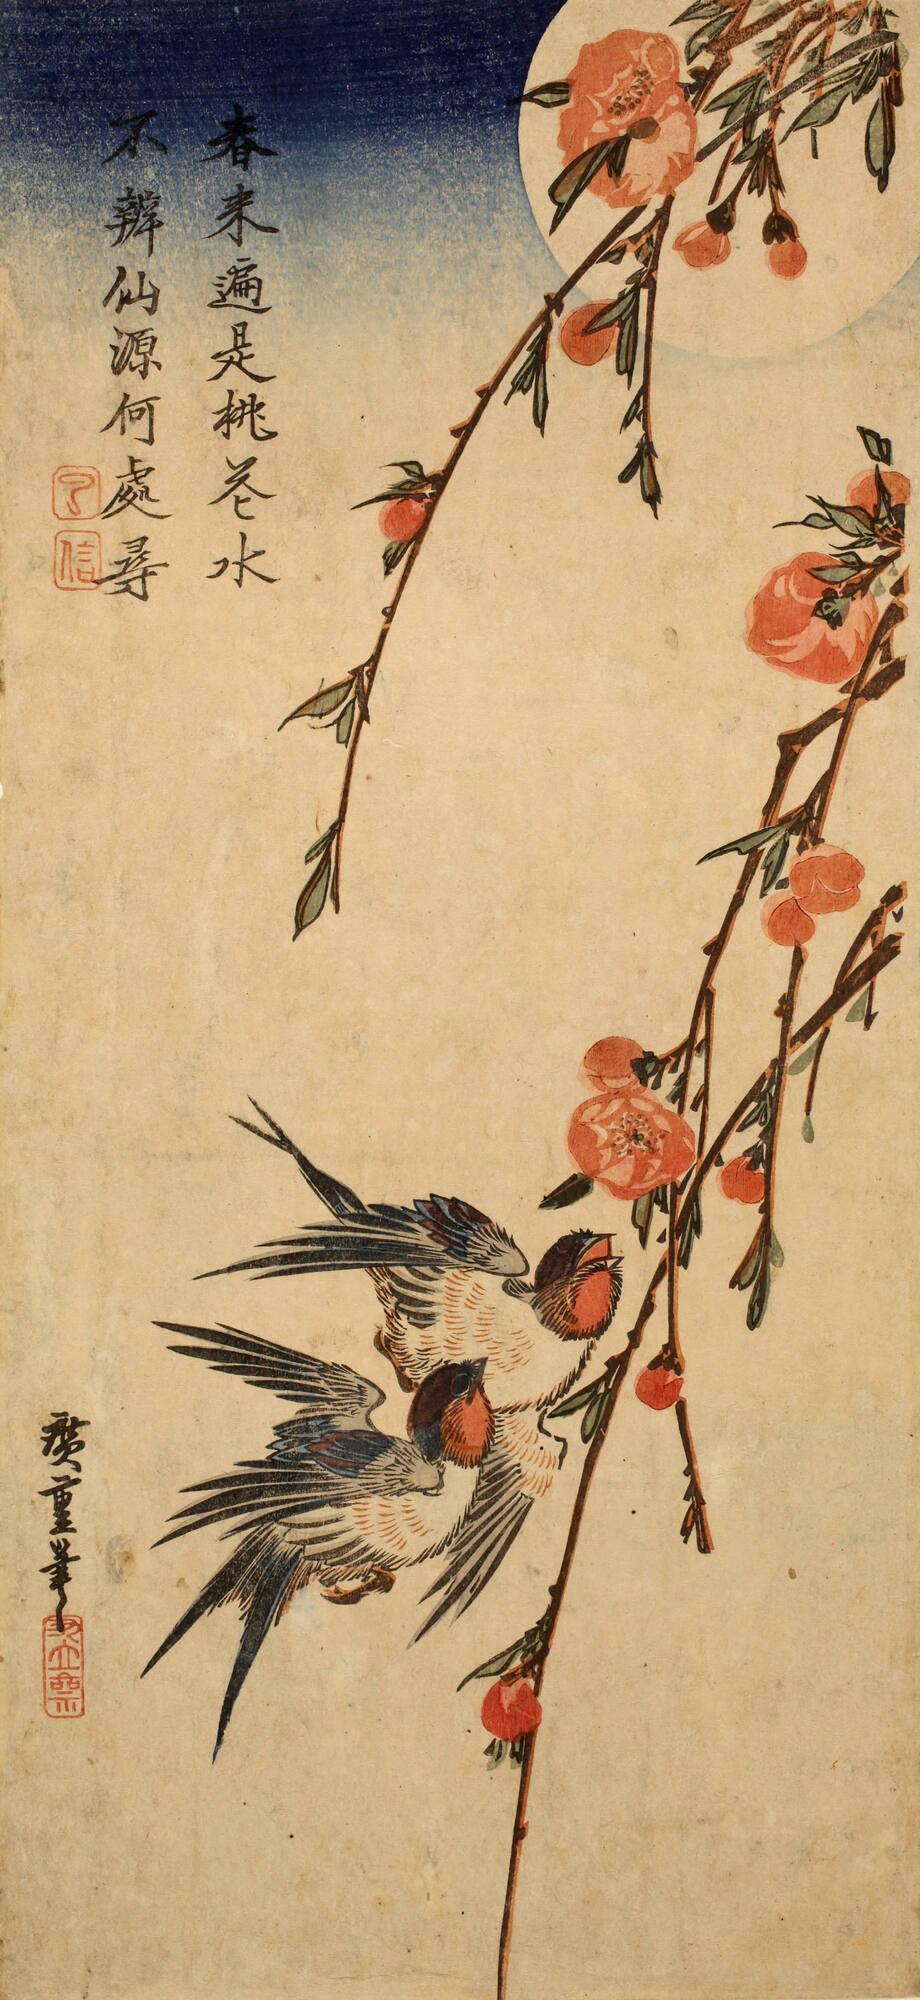 Swallows and Peach Blossoms Under a Full Moon